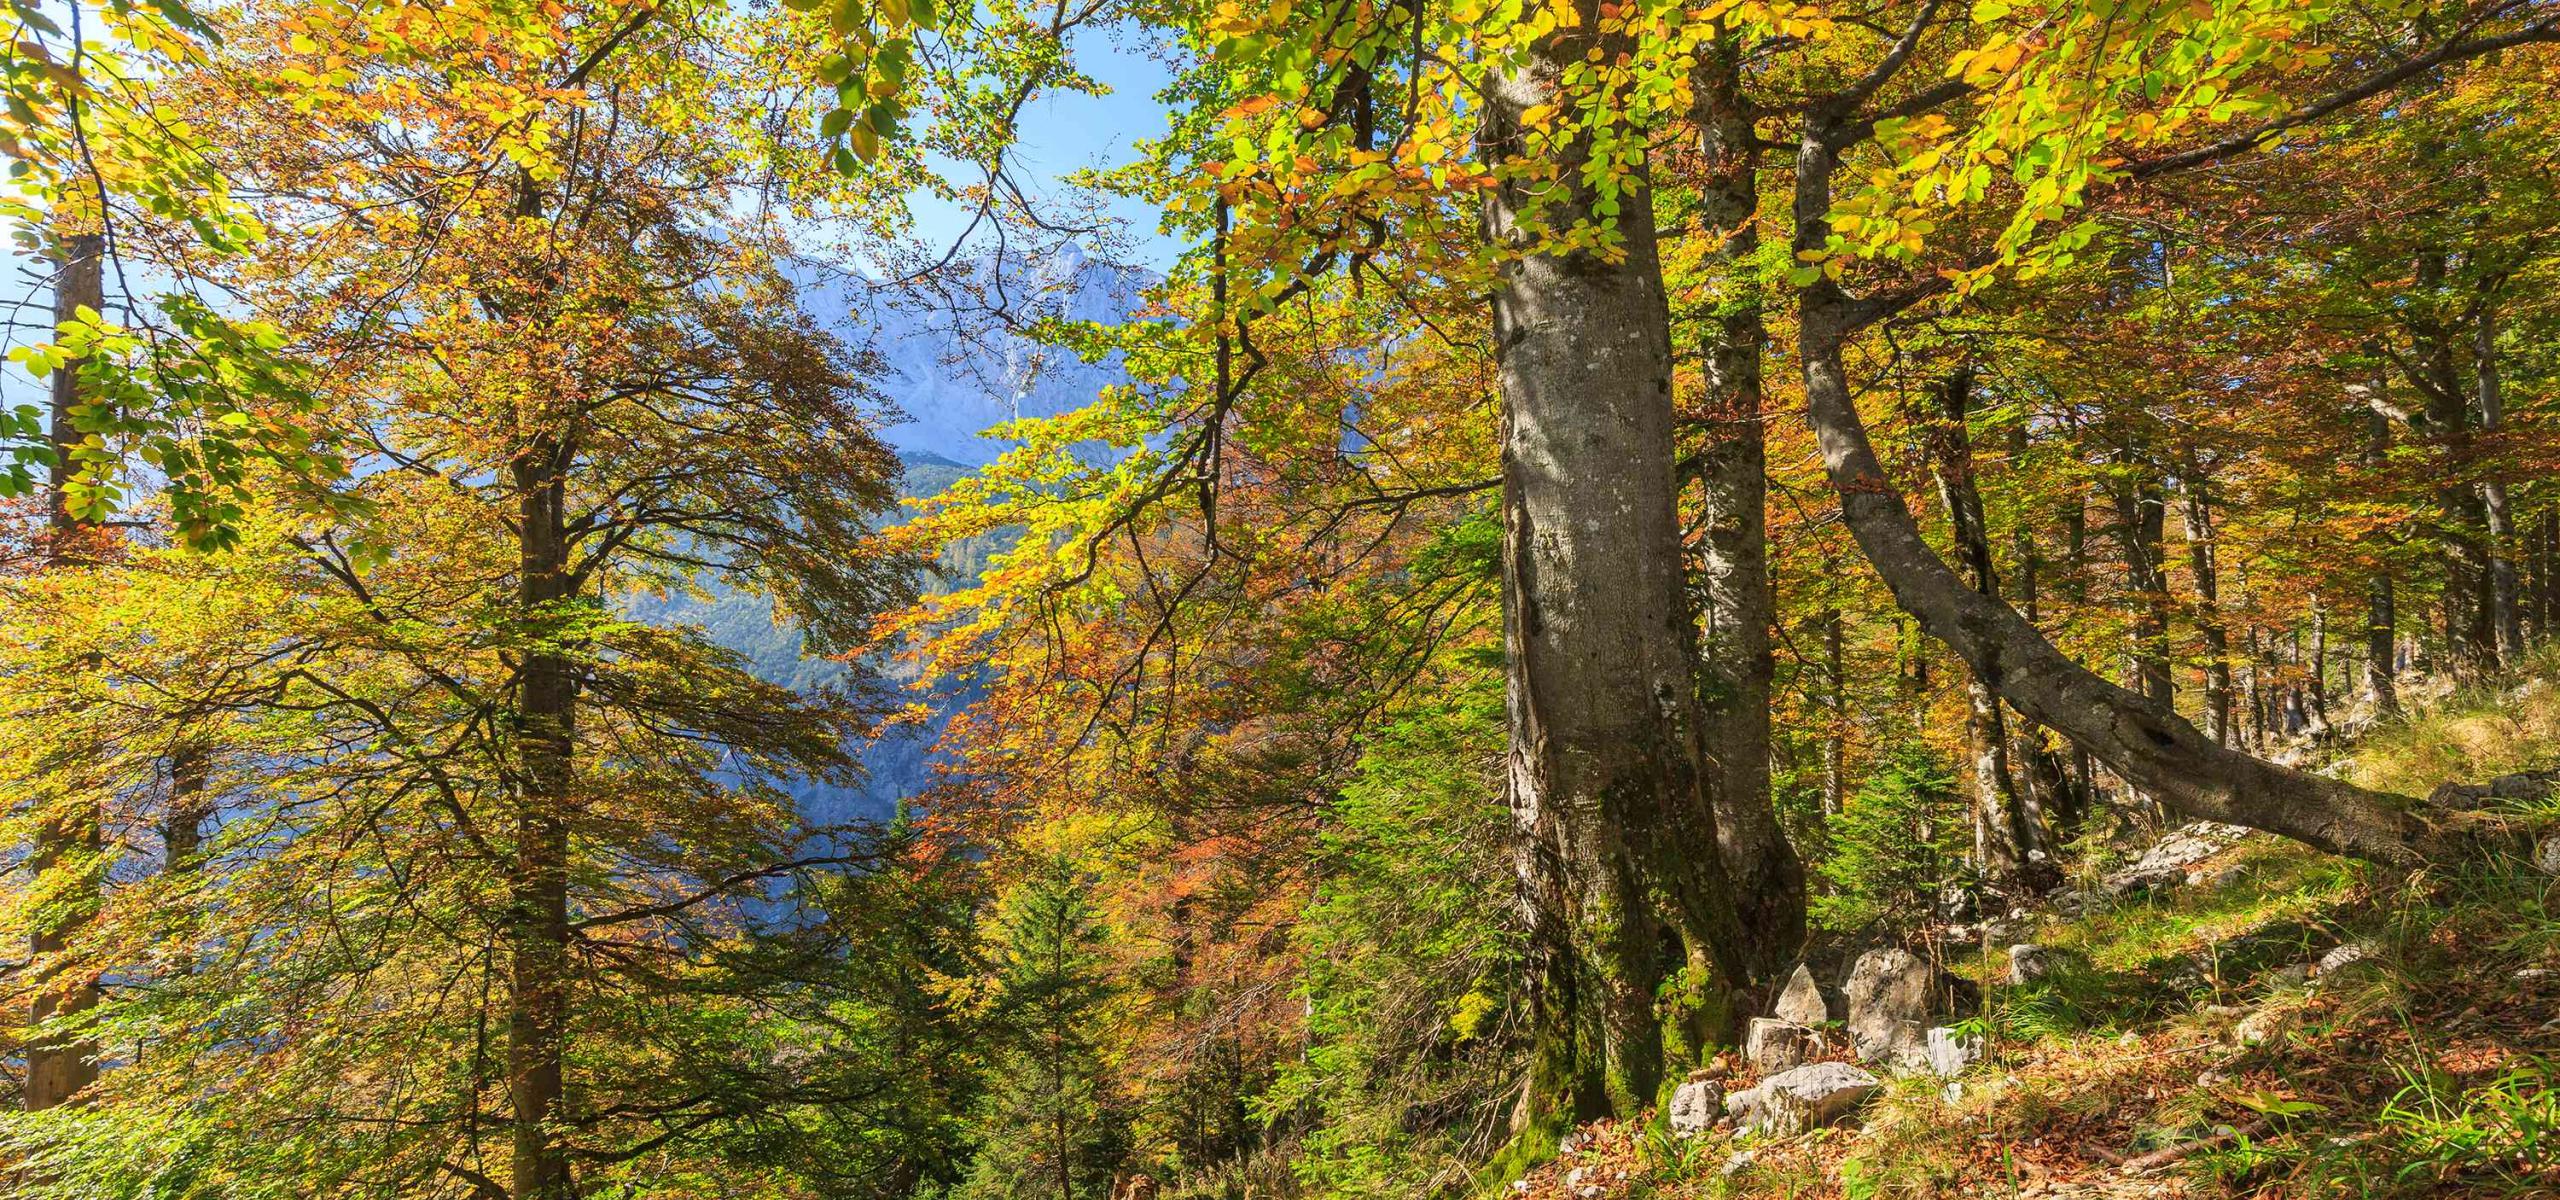 Mighty, autumn-colored beech trees stand on a mountainside